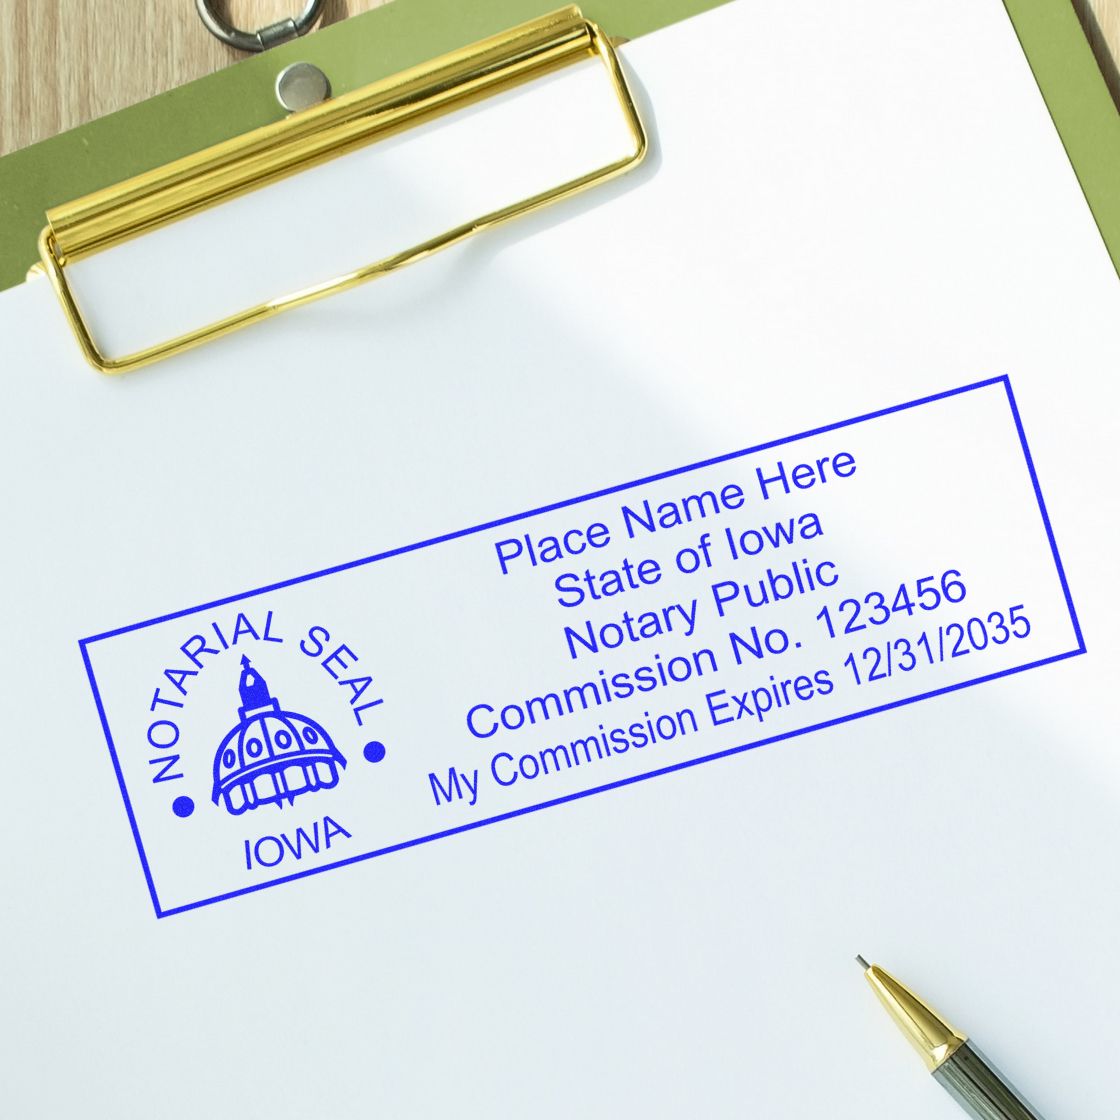 The MaxLight Premium Pre-Inked Iowa State Seal Notarial Stamp stamp impression comes to life with a crisp, detailed photo on paper - showcasing true professional quality.